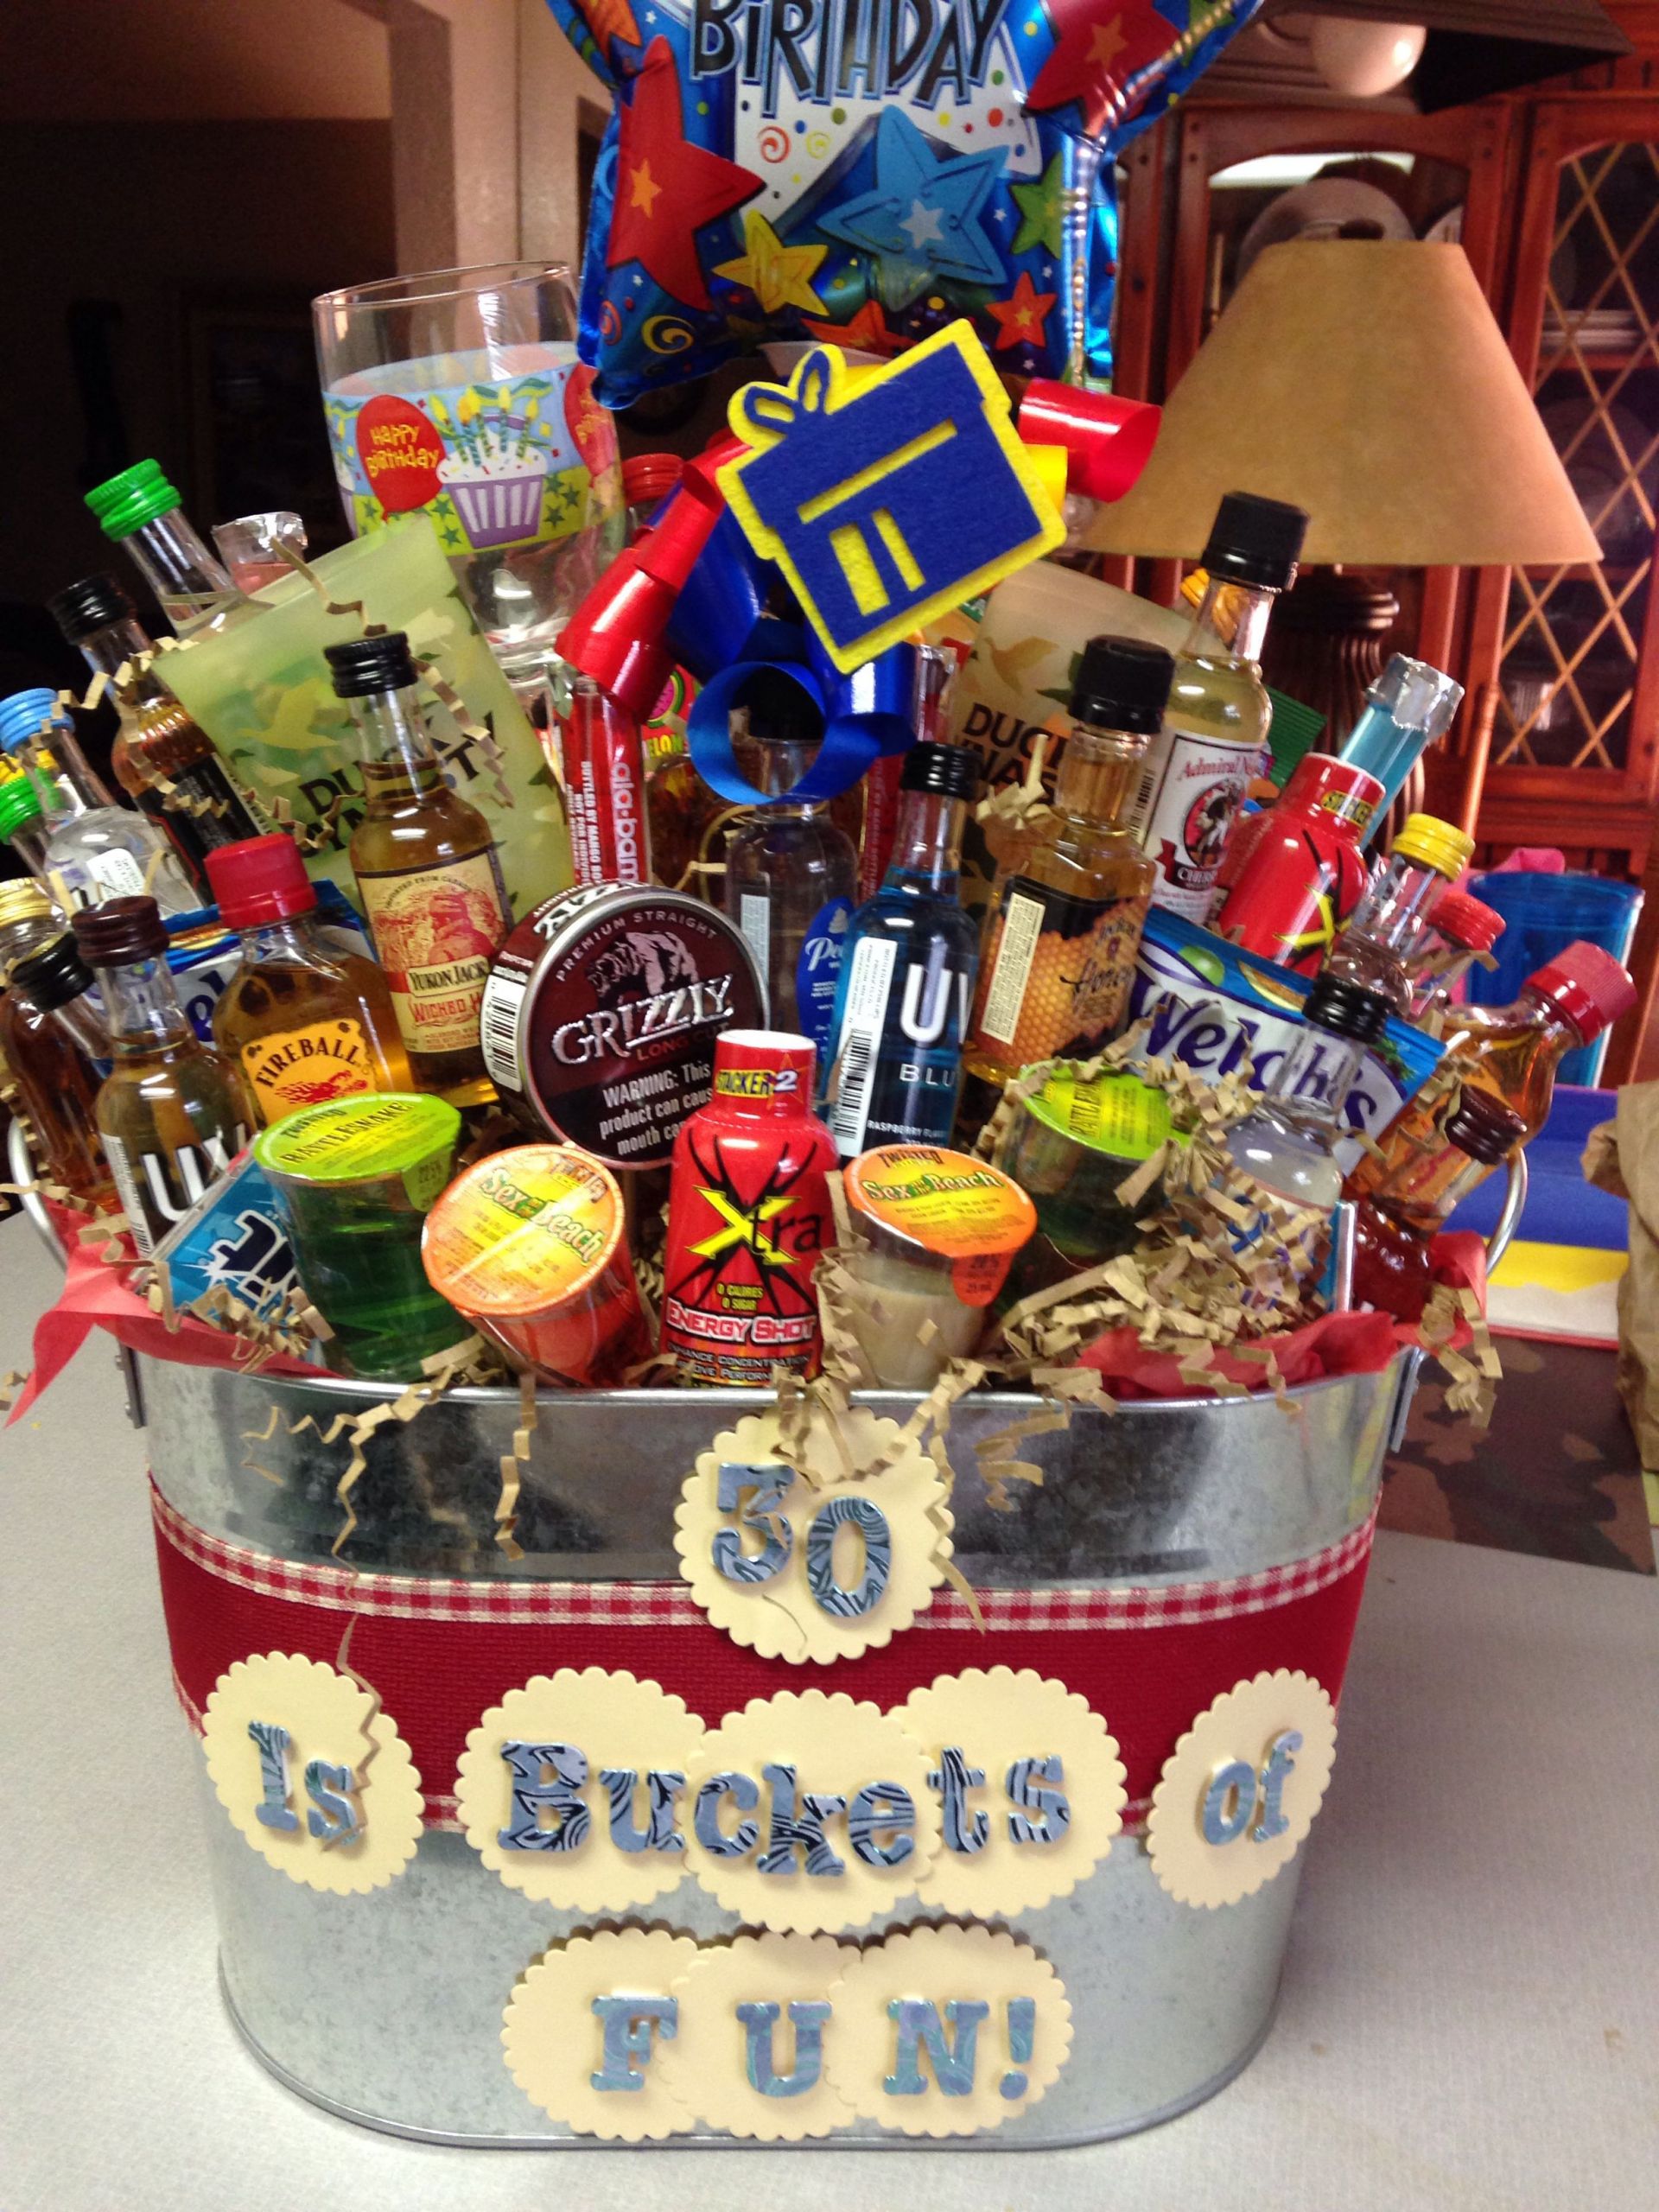 30 Years Old Birthday Gift Ideas
 Turning dirty 30 t basket Cute Stuff